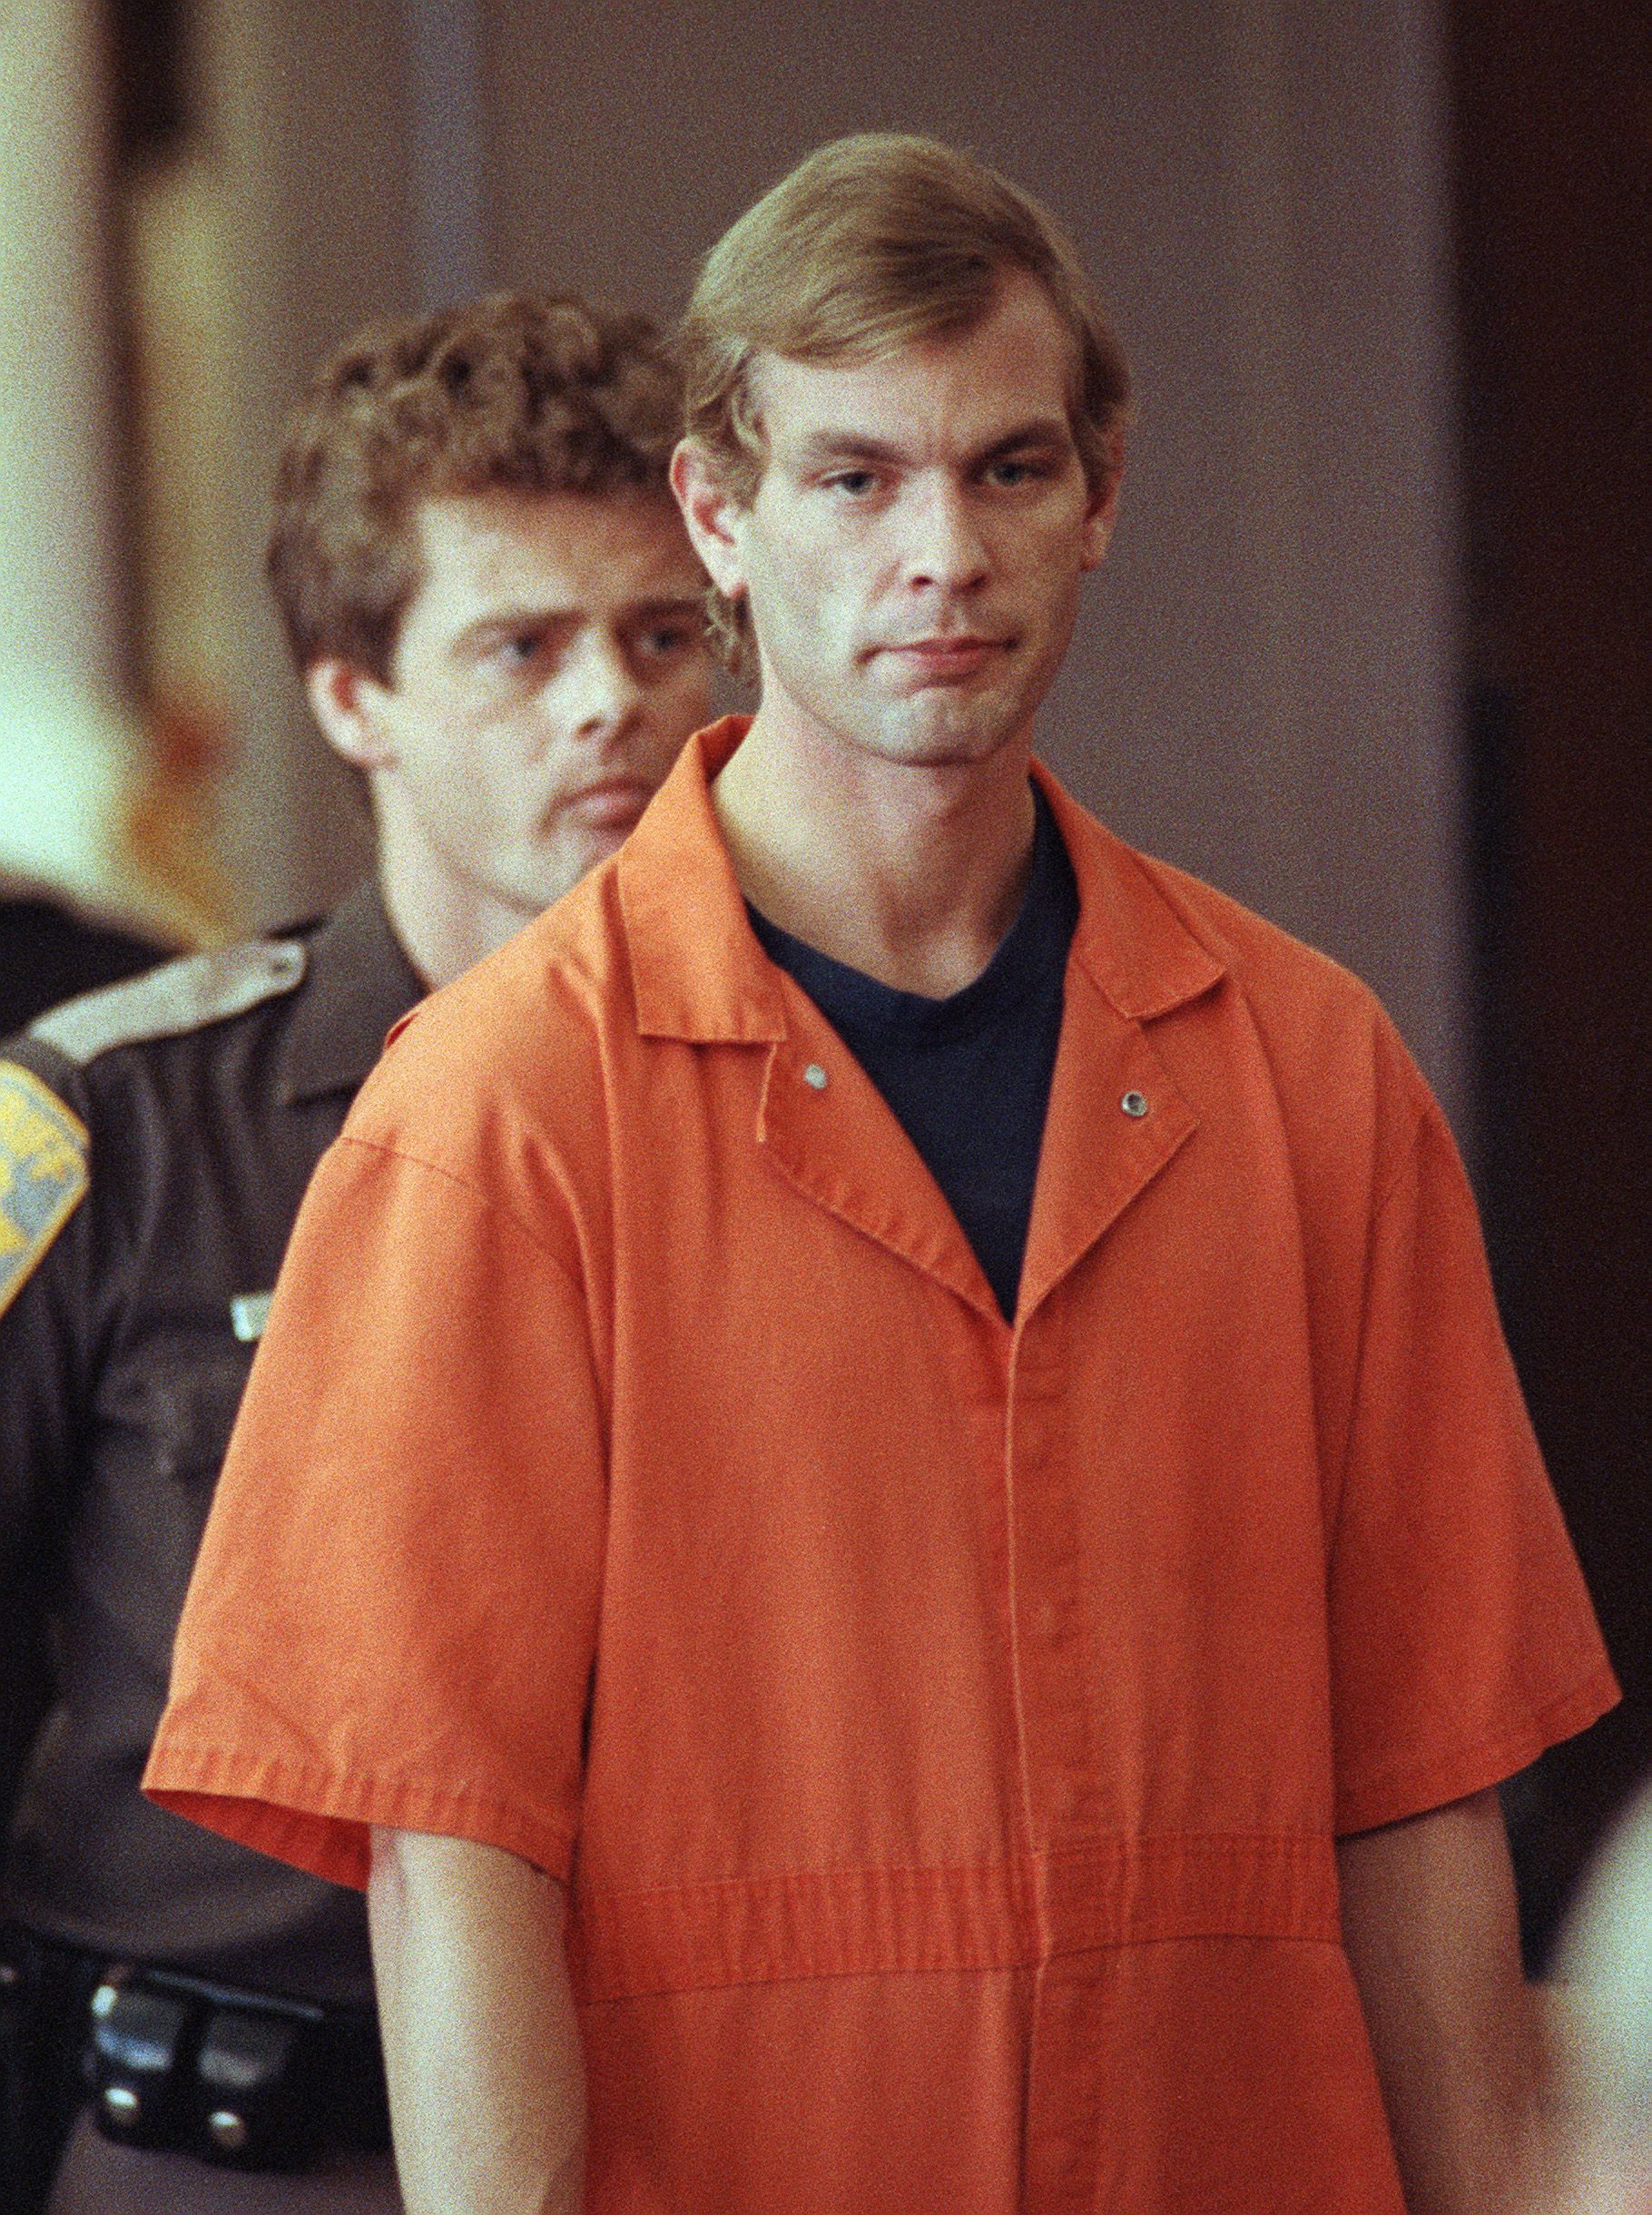 During his first year behind bars, Dahmer was placed in solitary confinement.